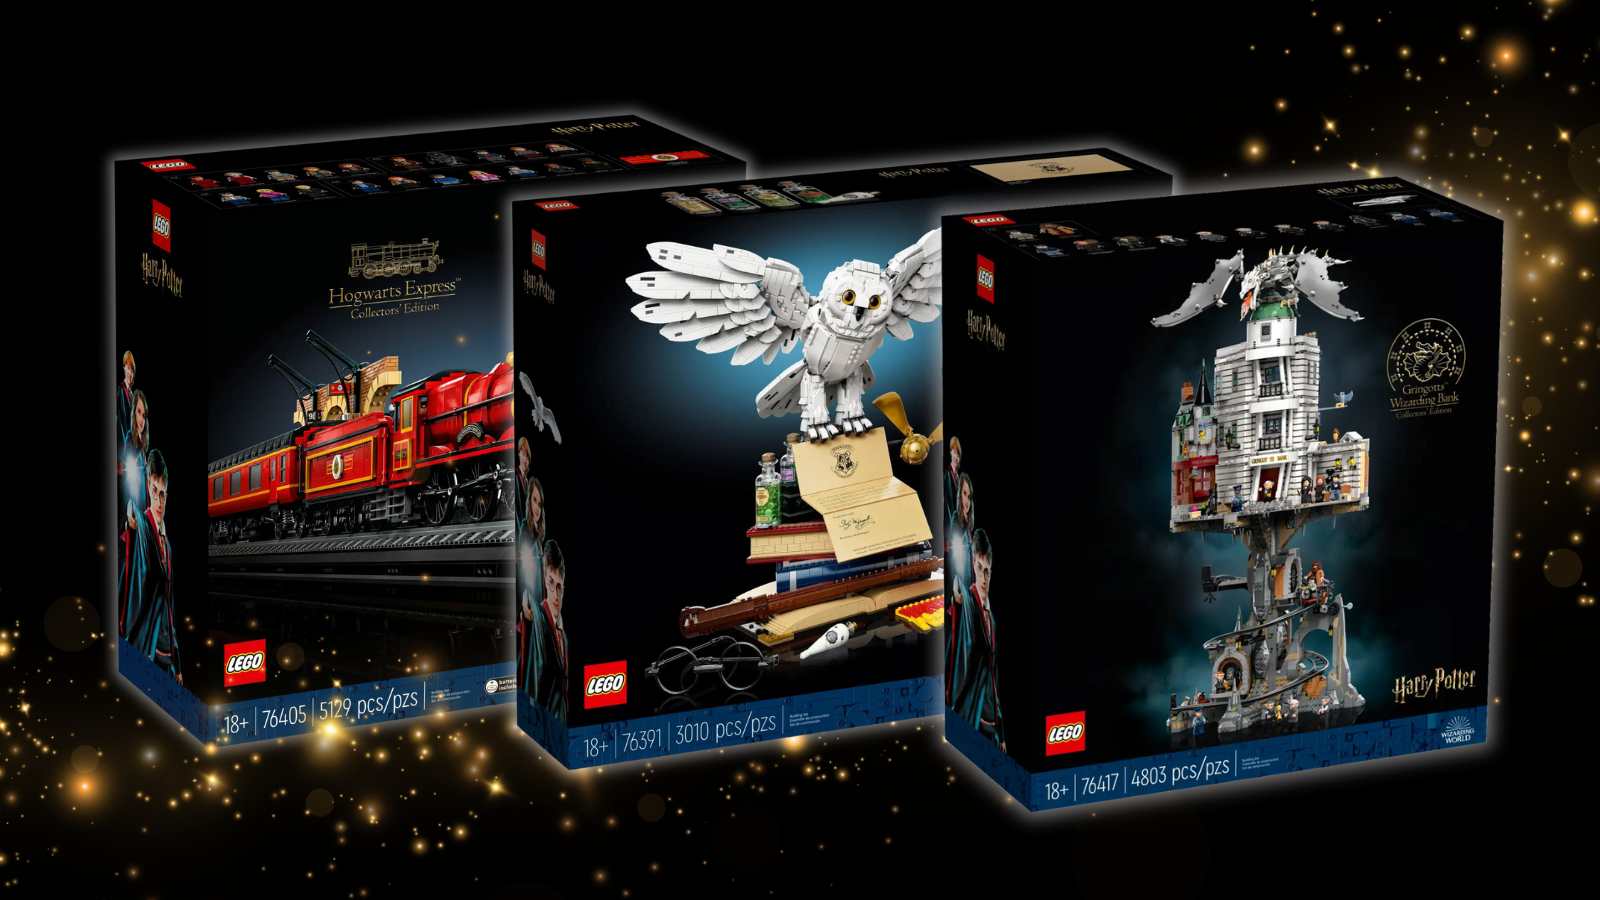 LEGO 76417 Harry Potter Wizarding Gringotts Bank Collector's Edition 4803  Piece